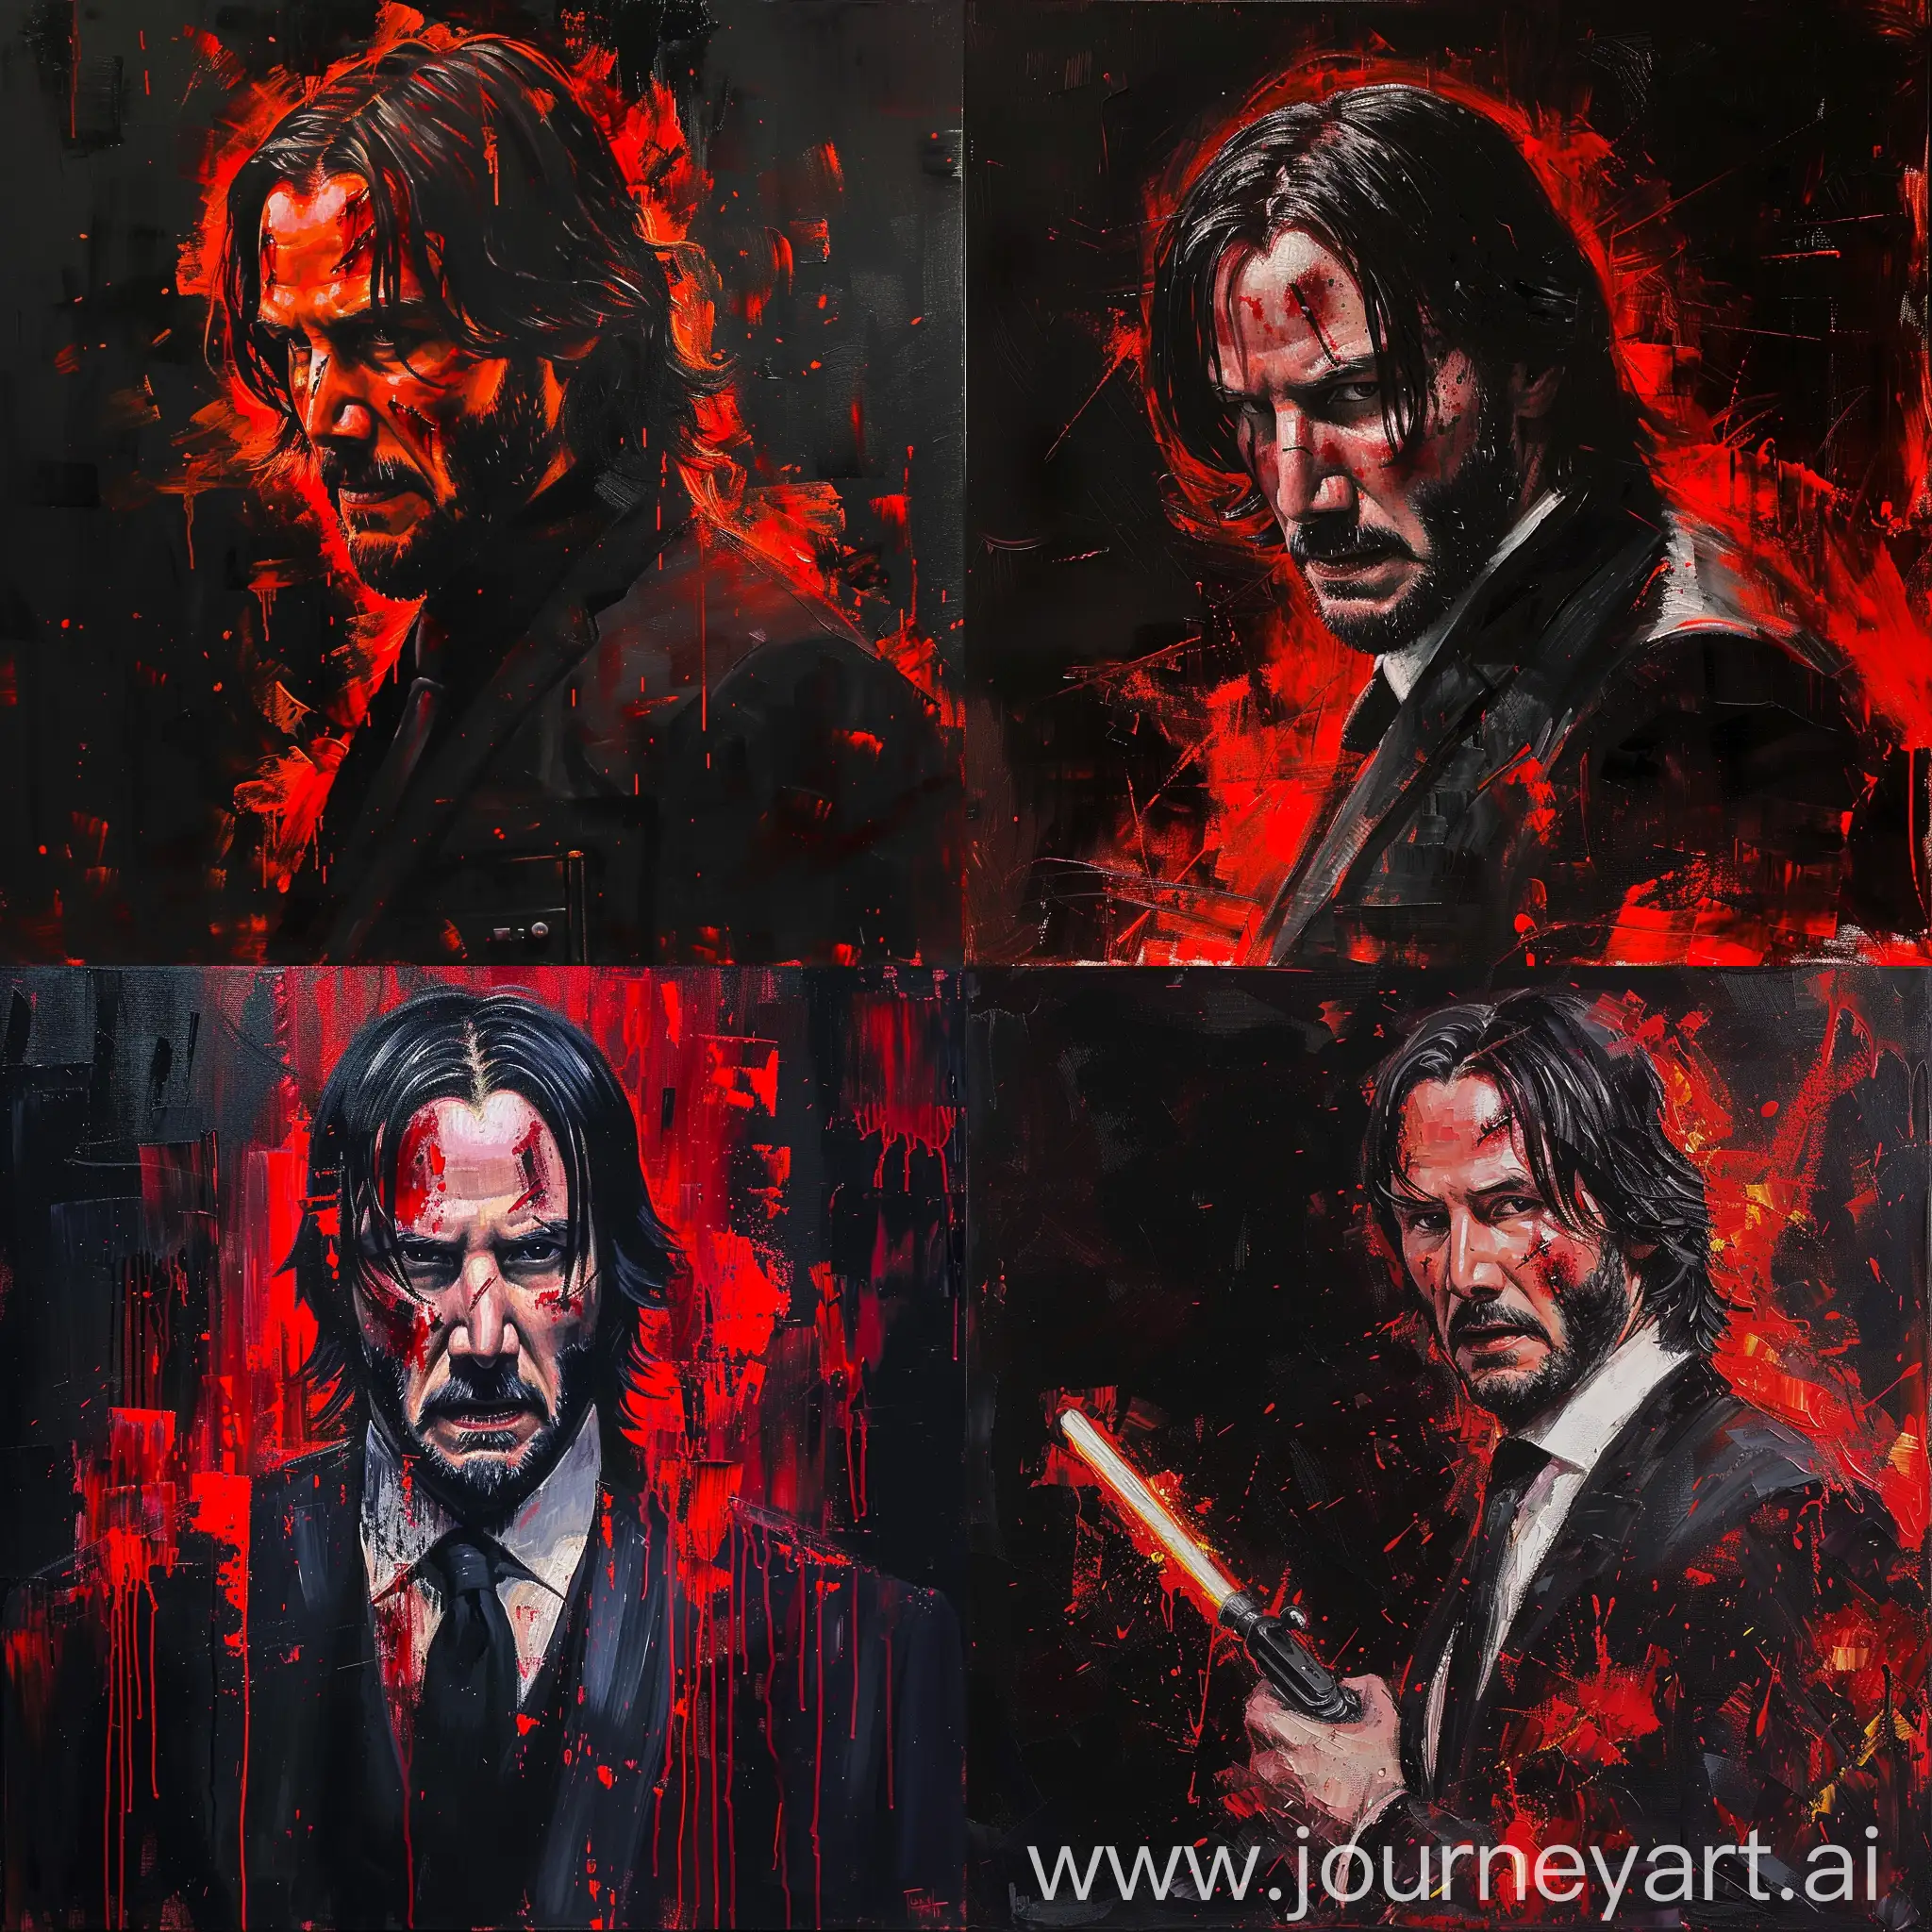 Oil painting of john wick in star wars style, dark, moody, full of bright red colour in chalk like form
